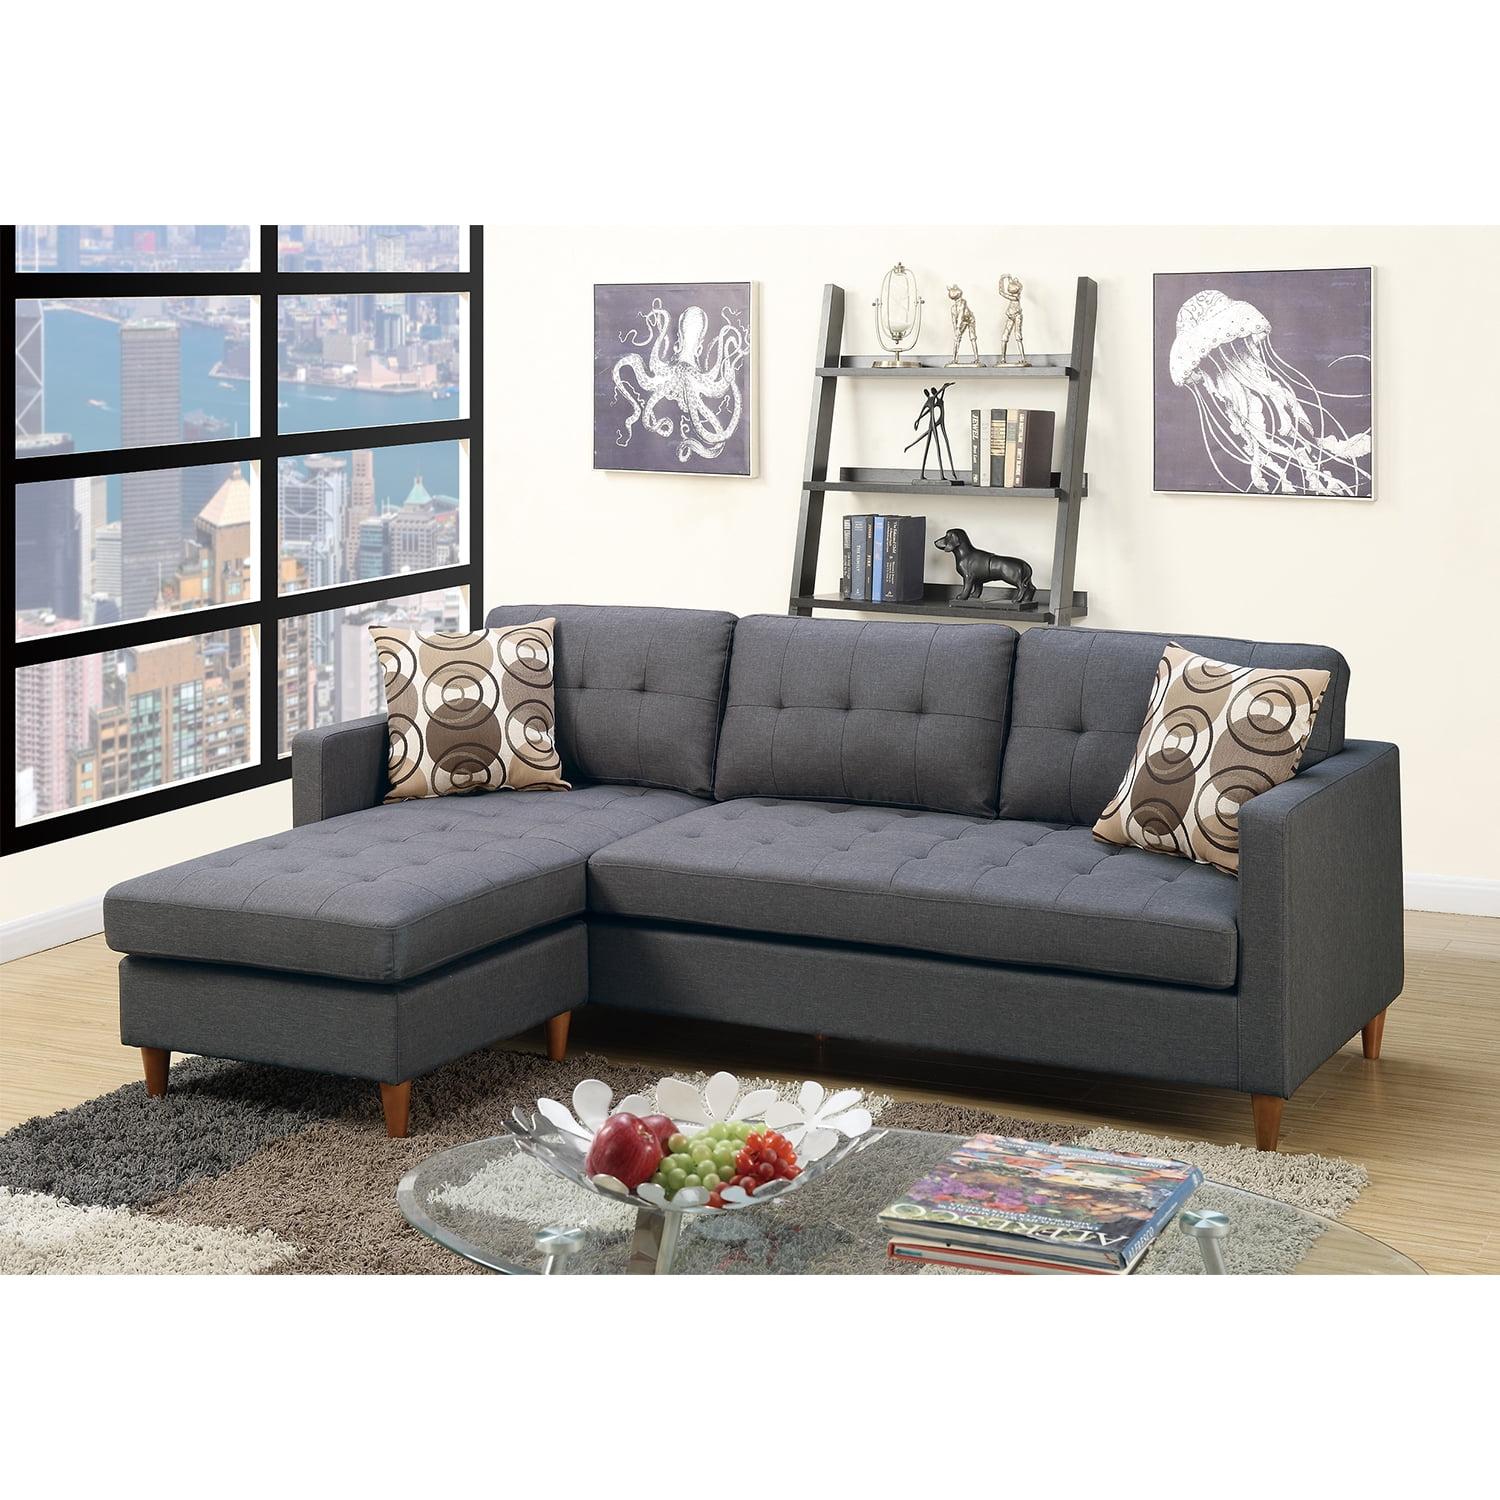 Gray Tufted Fabric Reception Sectional Sofa Set with Pillow Back